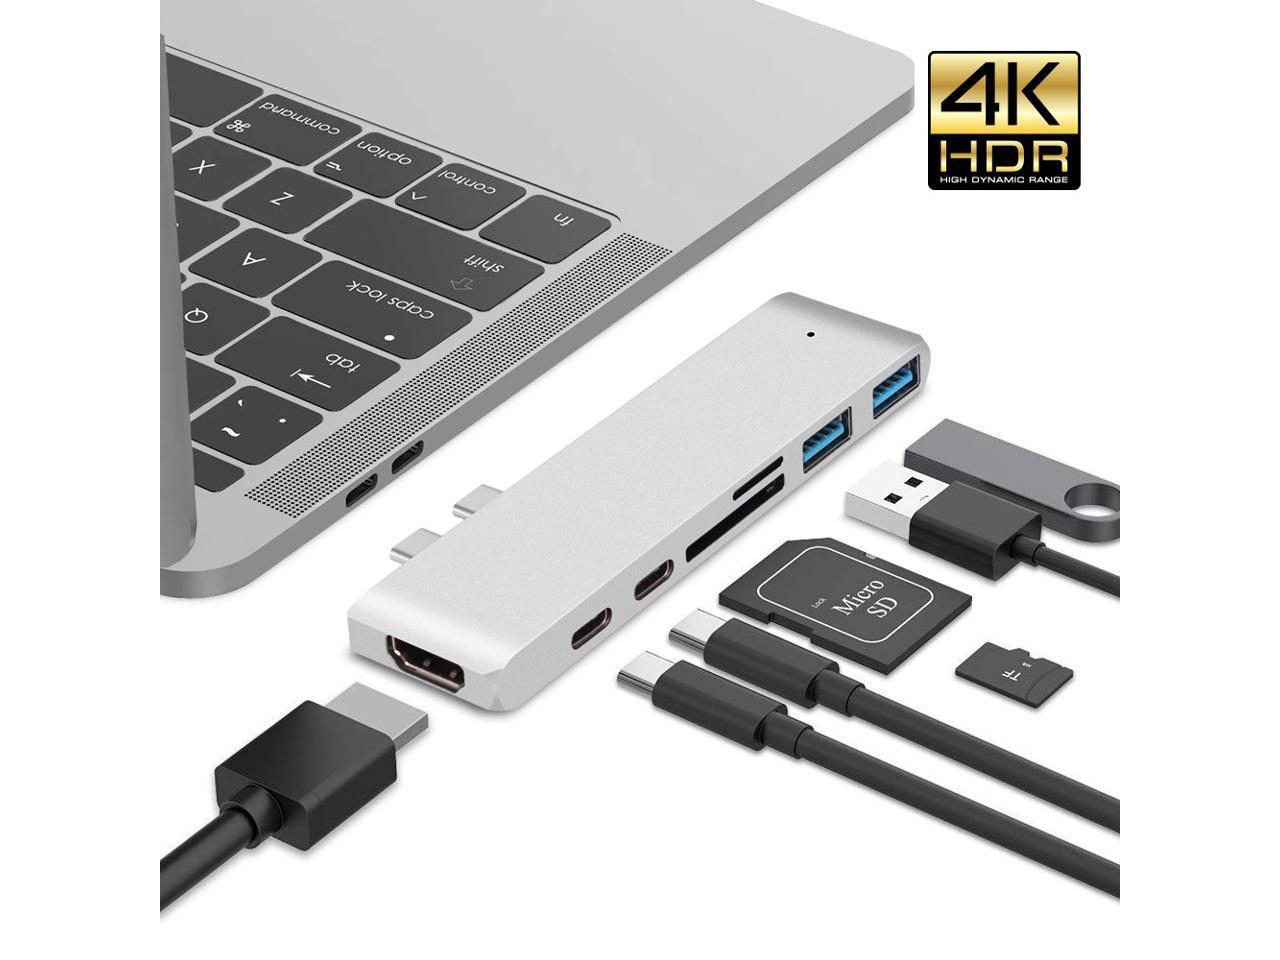 4K HDMI USB-C Power Delivery 3 USB 3.0 Ports USB C Hub Adapter SD/TF Card Reader ENKLEN 8-in-1 Type C Hub with Gigabit Ethernet USB C Dongle for MacBook Pro/Air and Other Type C Laptops 